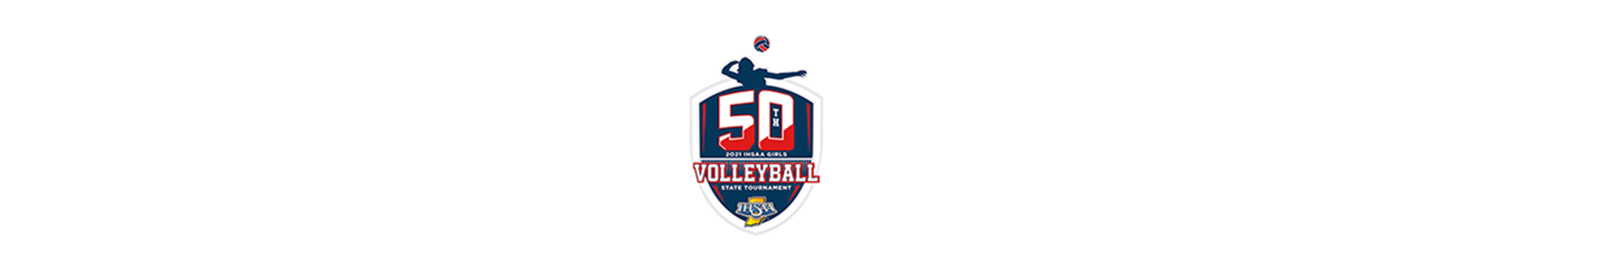 50th IHSAA Volleyball State Championship